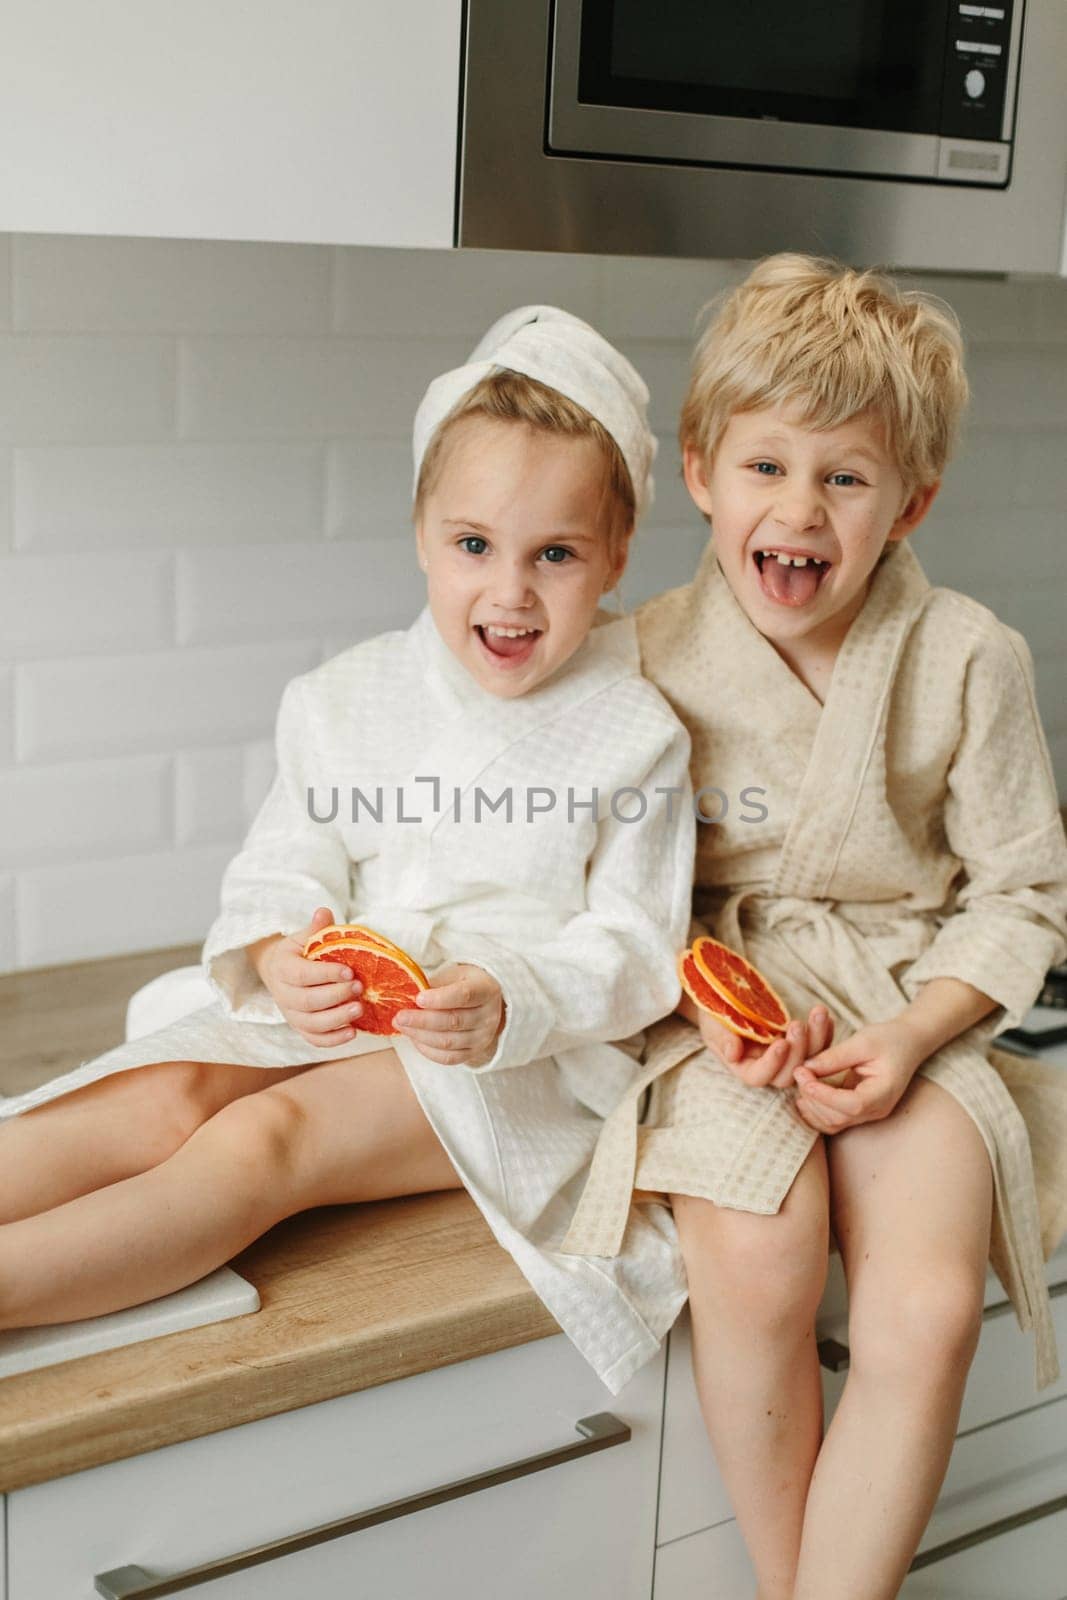 A girl and a boy in bathrobes are sitting in the kitchen with candied oranges in their hands, laughing.